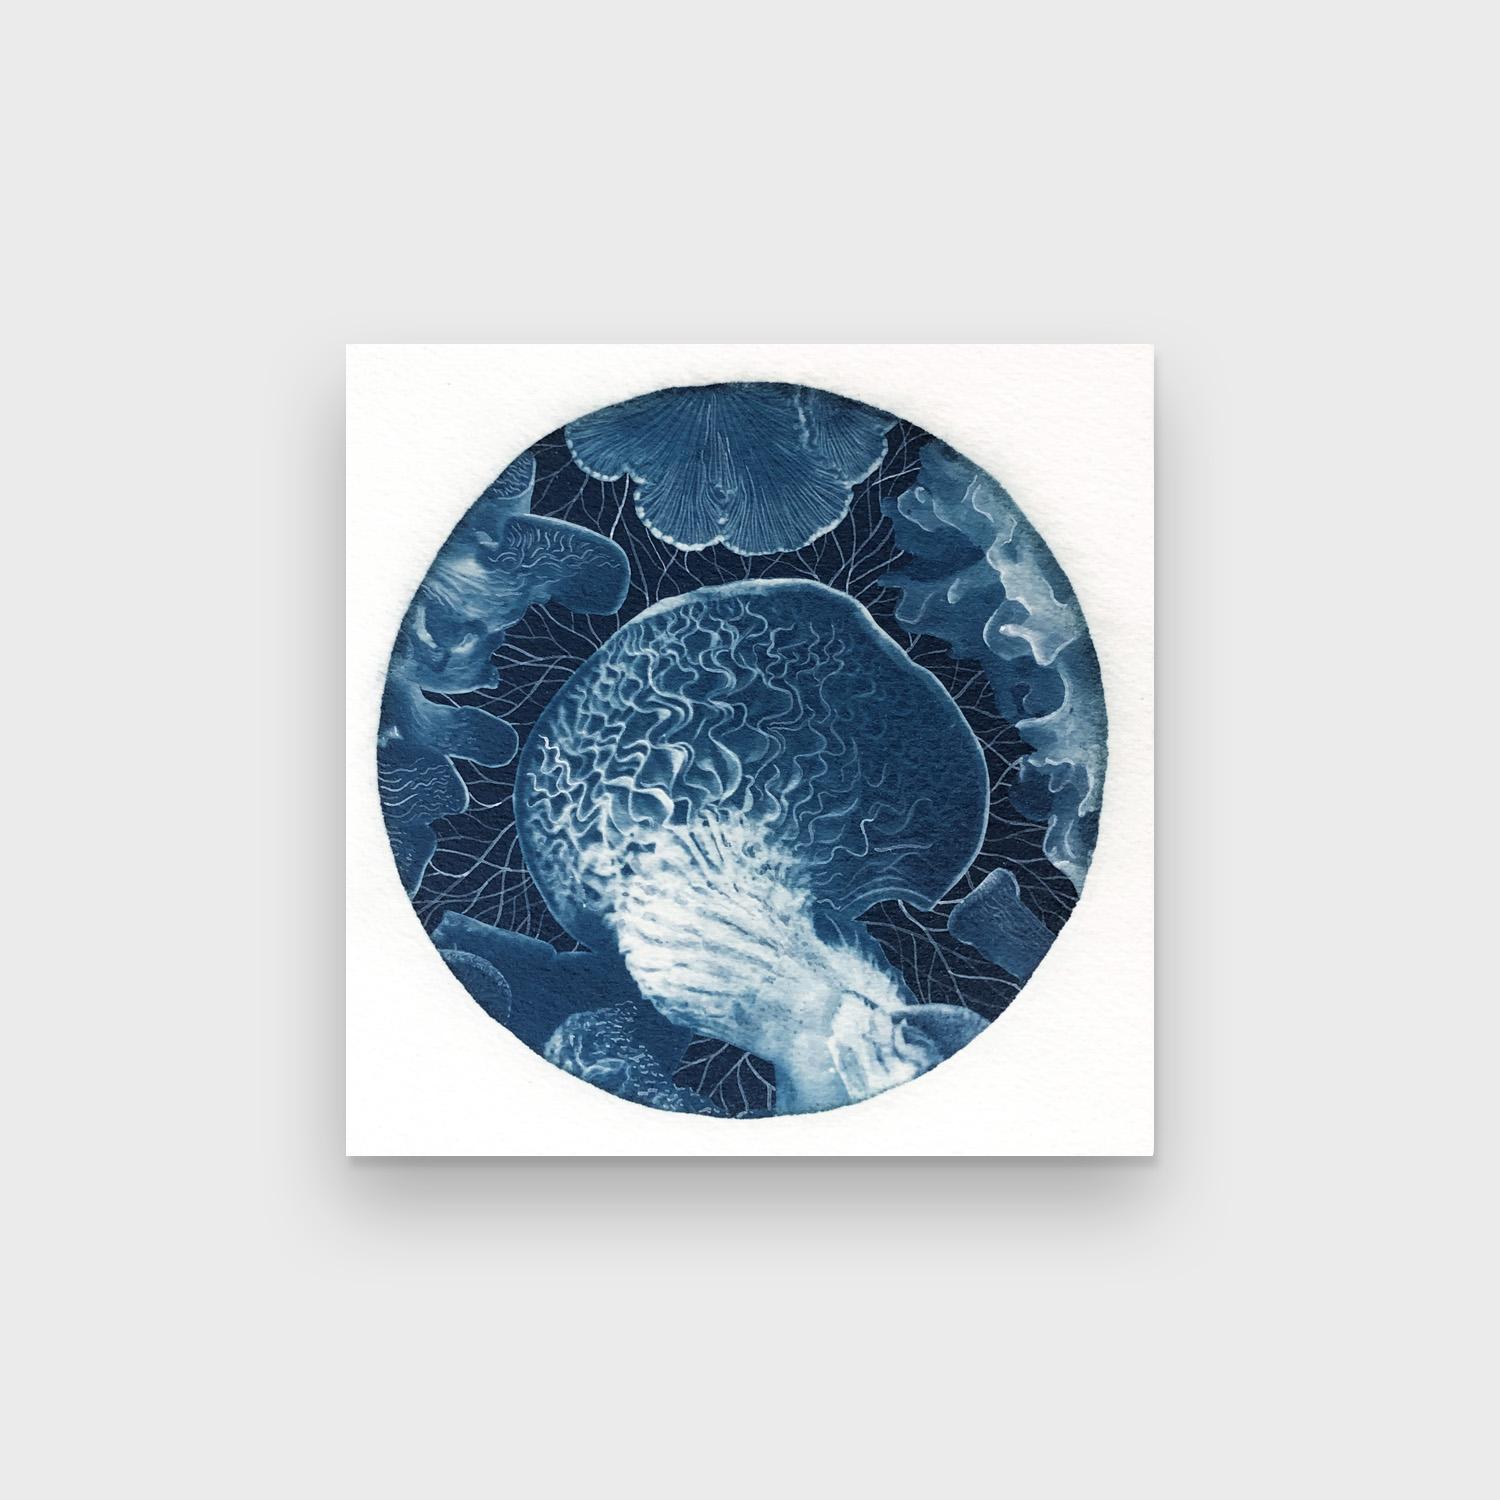 A Conceptually Surreal Watercolor on Cyanotype, "Pink Oyster Mushroom, Jelly..."